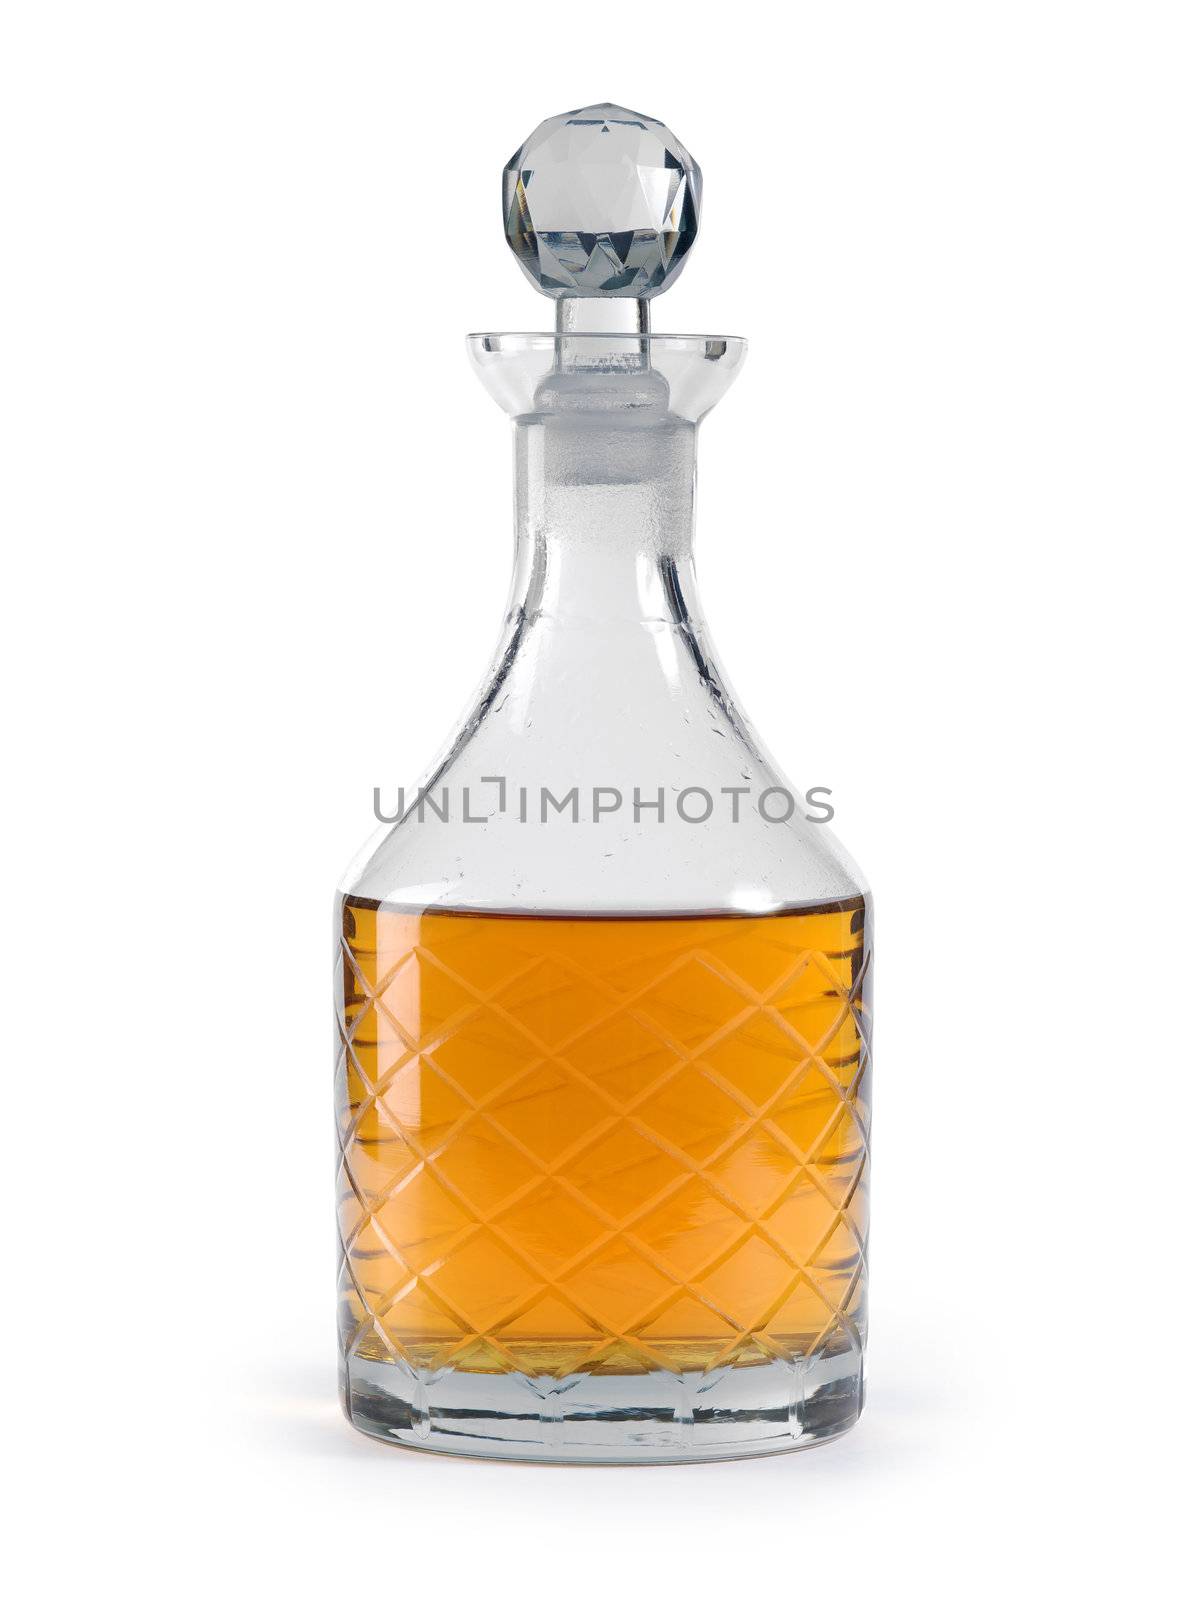 Whisky decanter by sumners